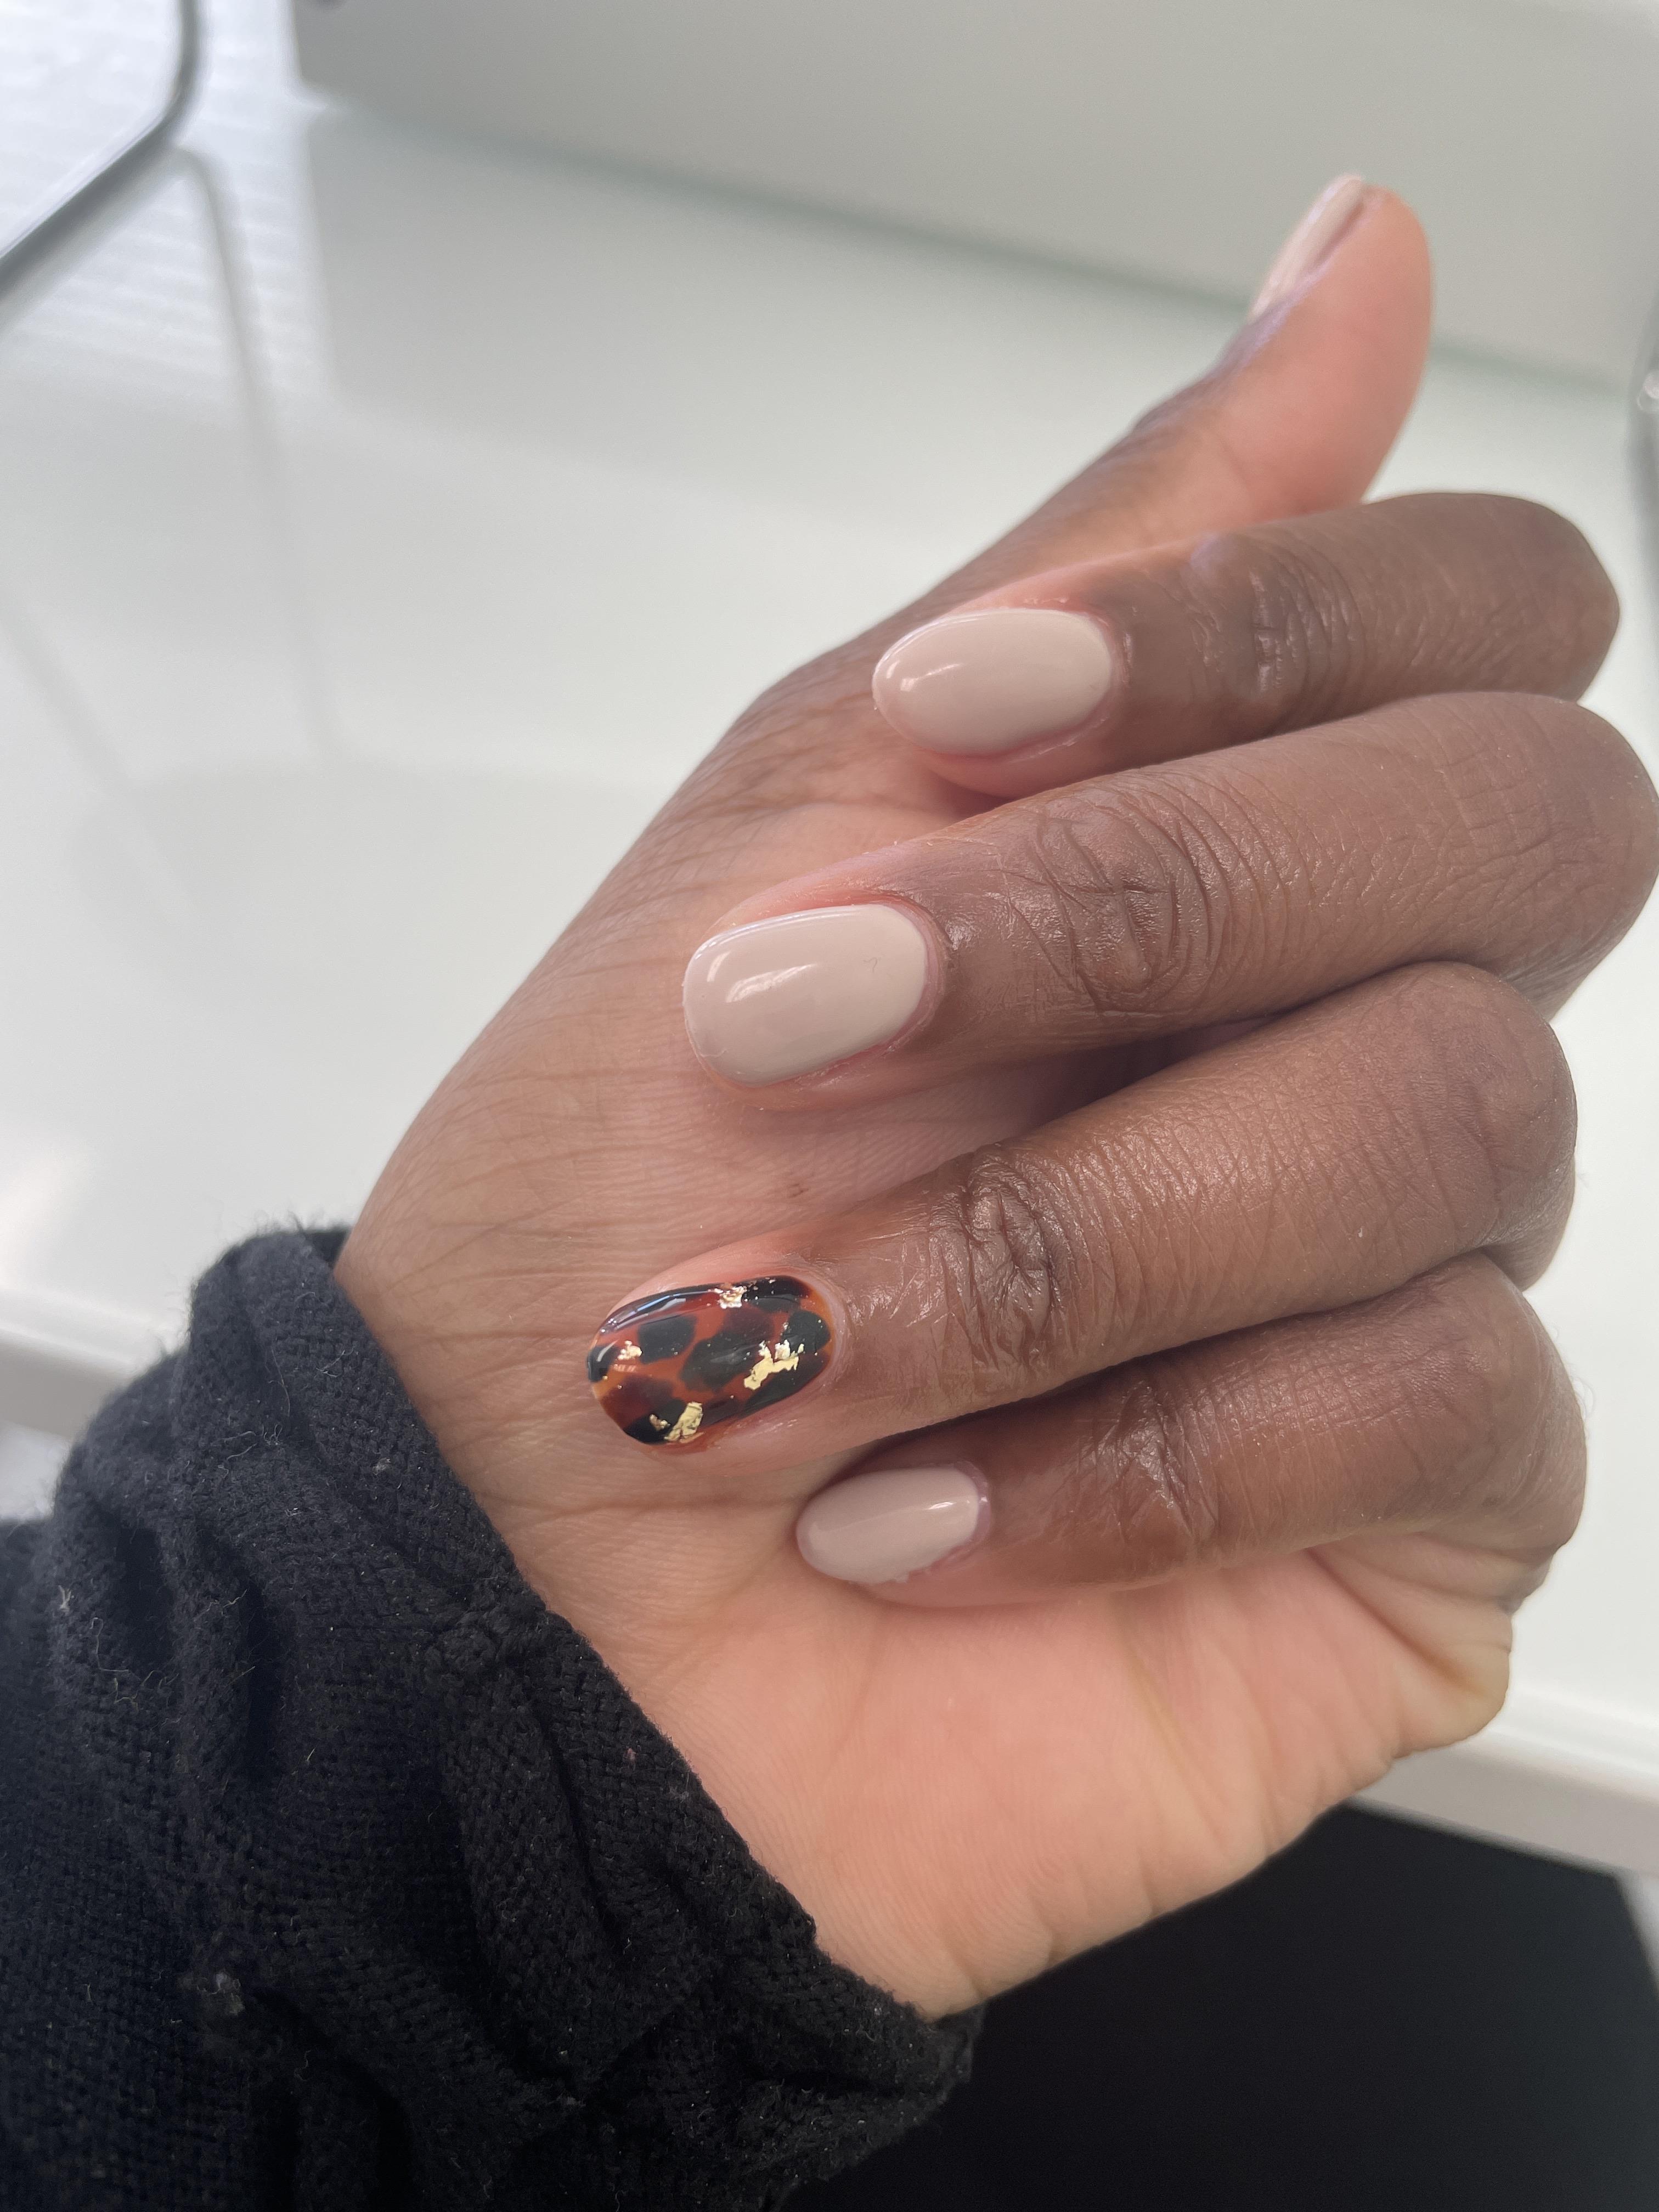 Nails By J – HomeBased